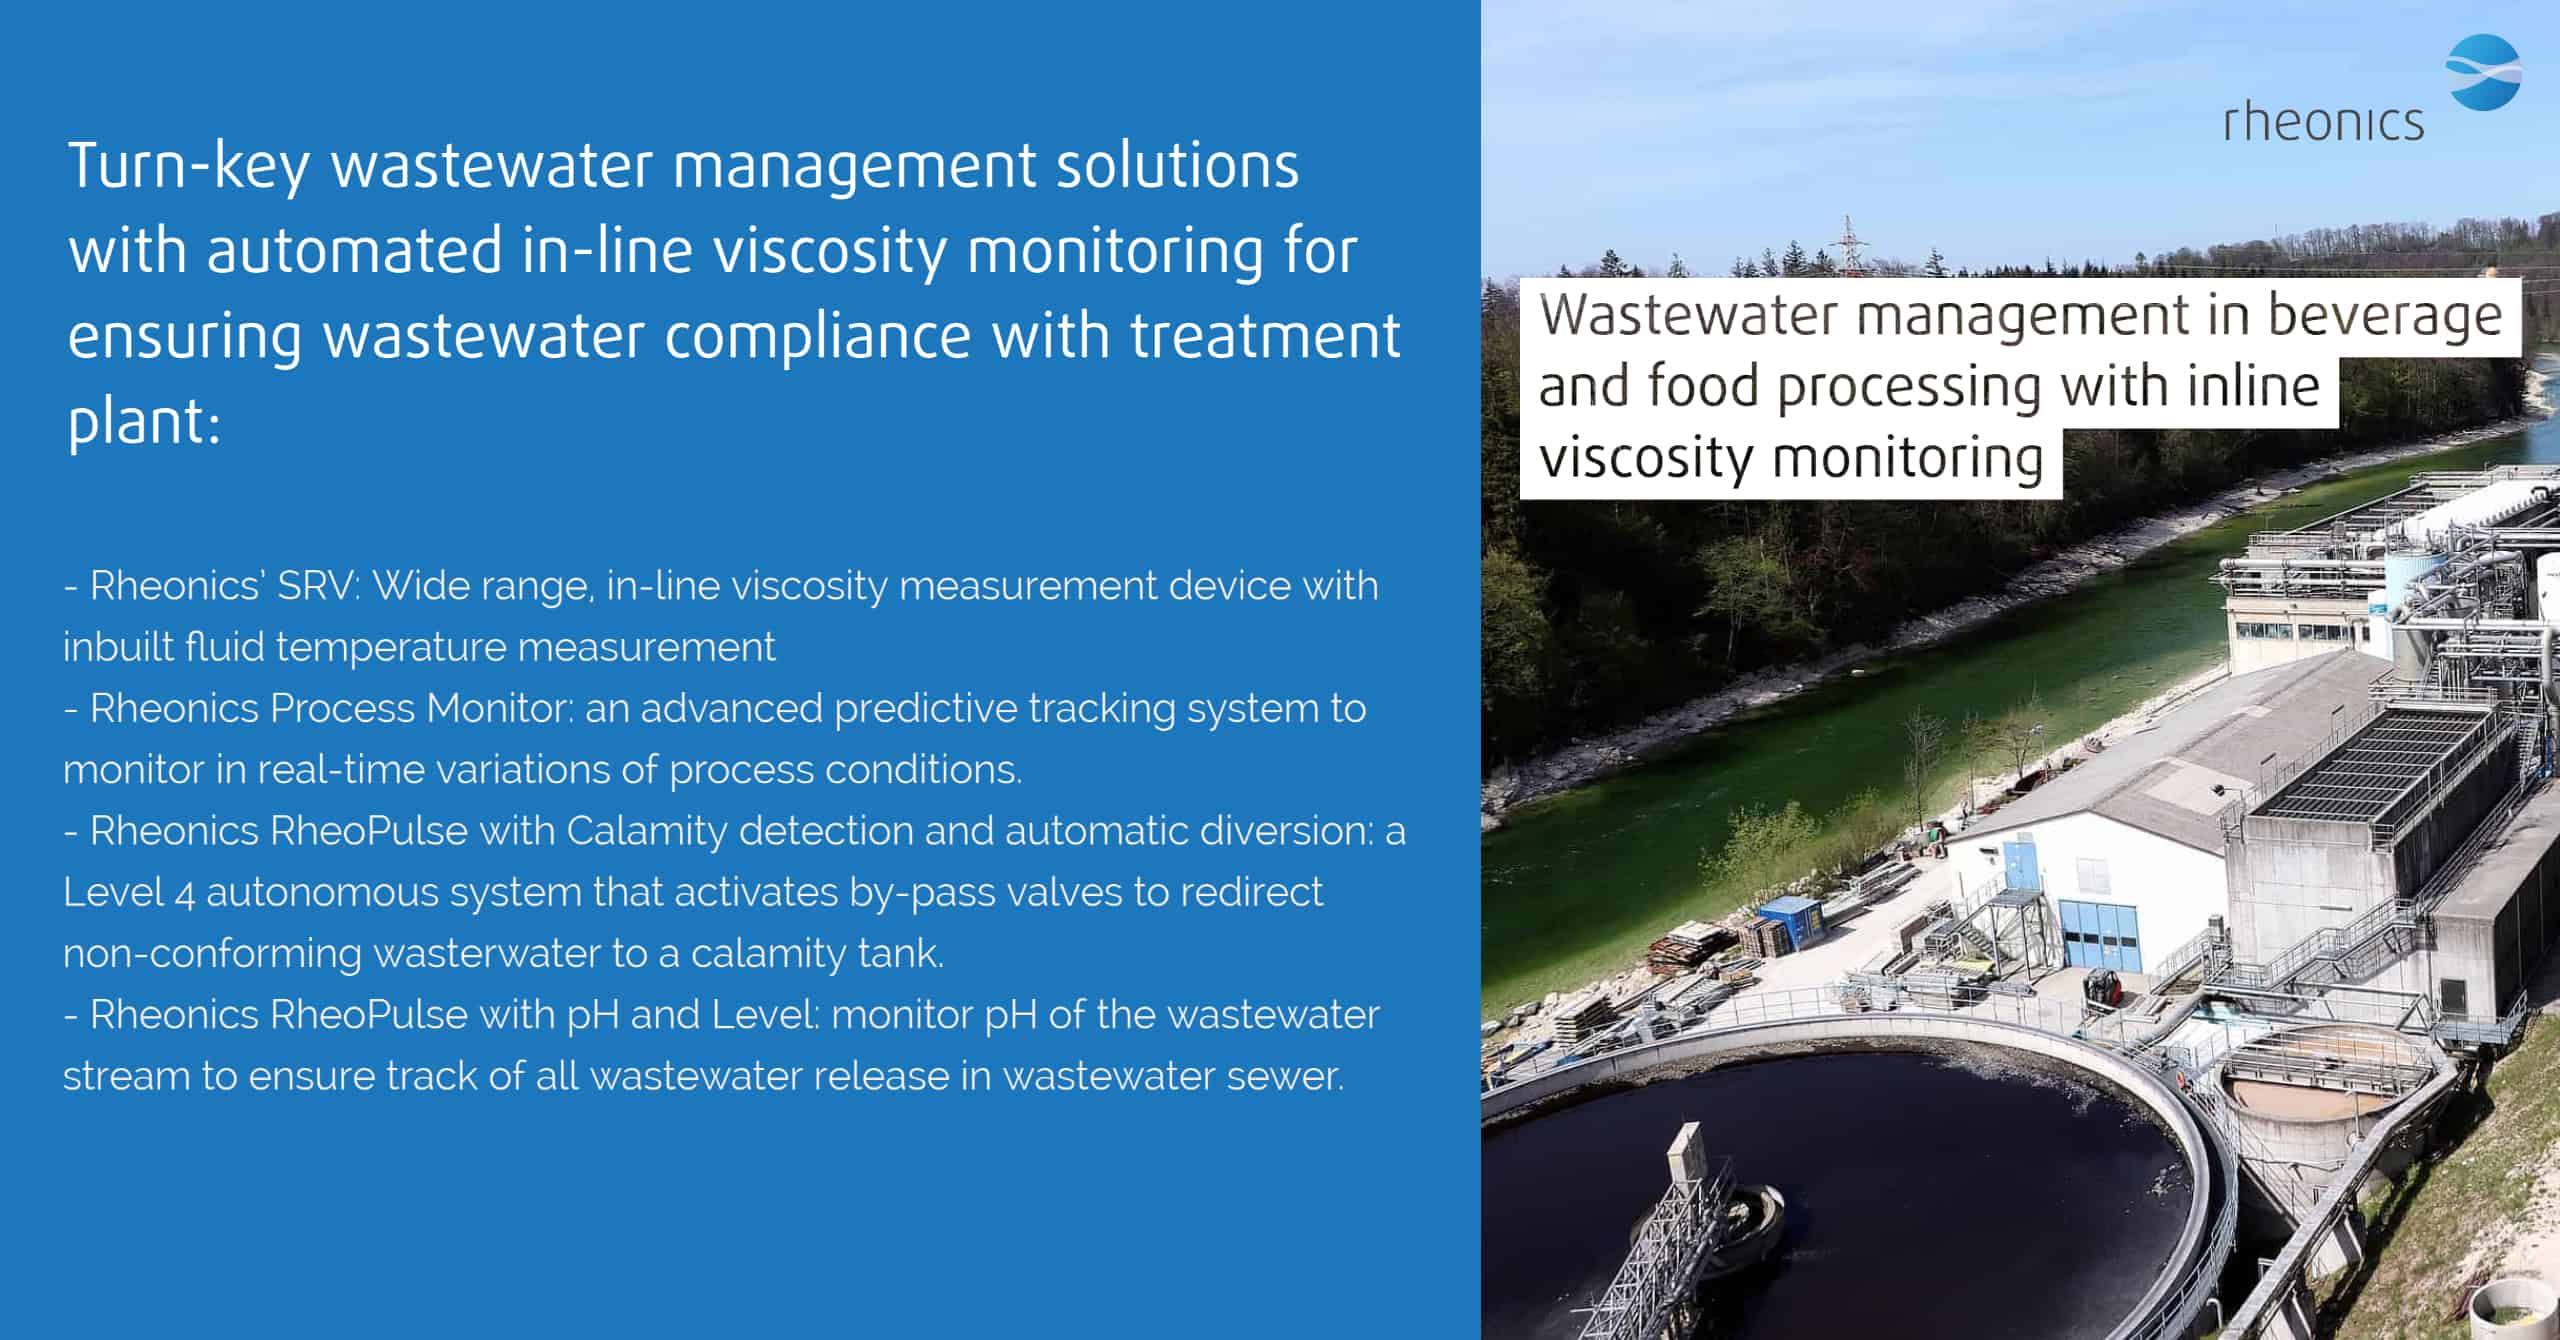 Wastewater management in beverage and food processing with inline viscosity monitoring - rheonics solutions